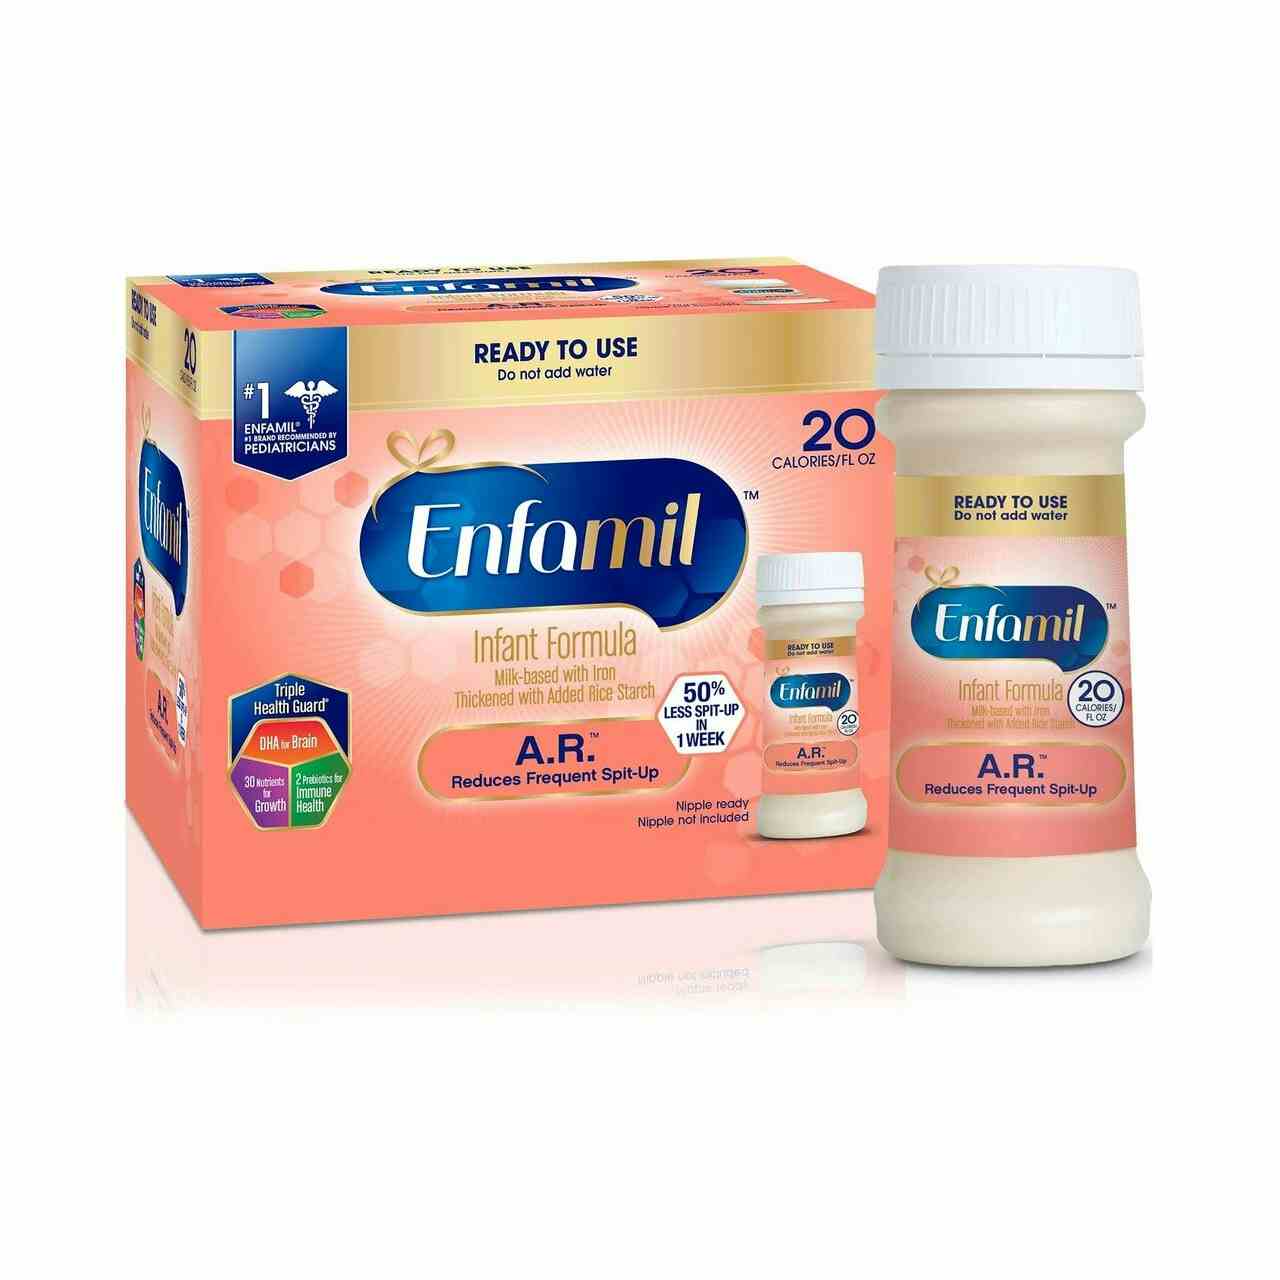 Enfamil A.R. Ready-to-use Formula with Lipil, Unflavored, 2 oz., 145301, Case of 48